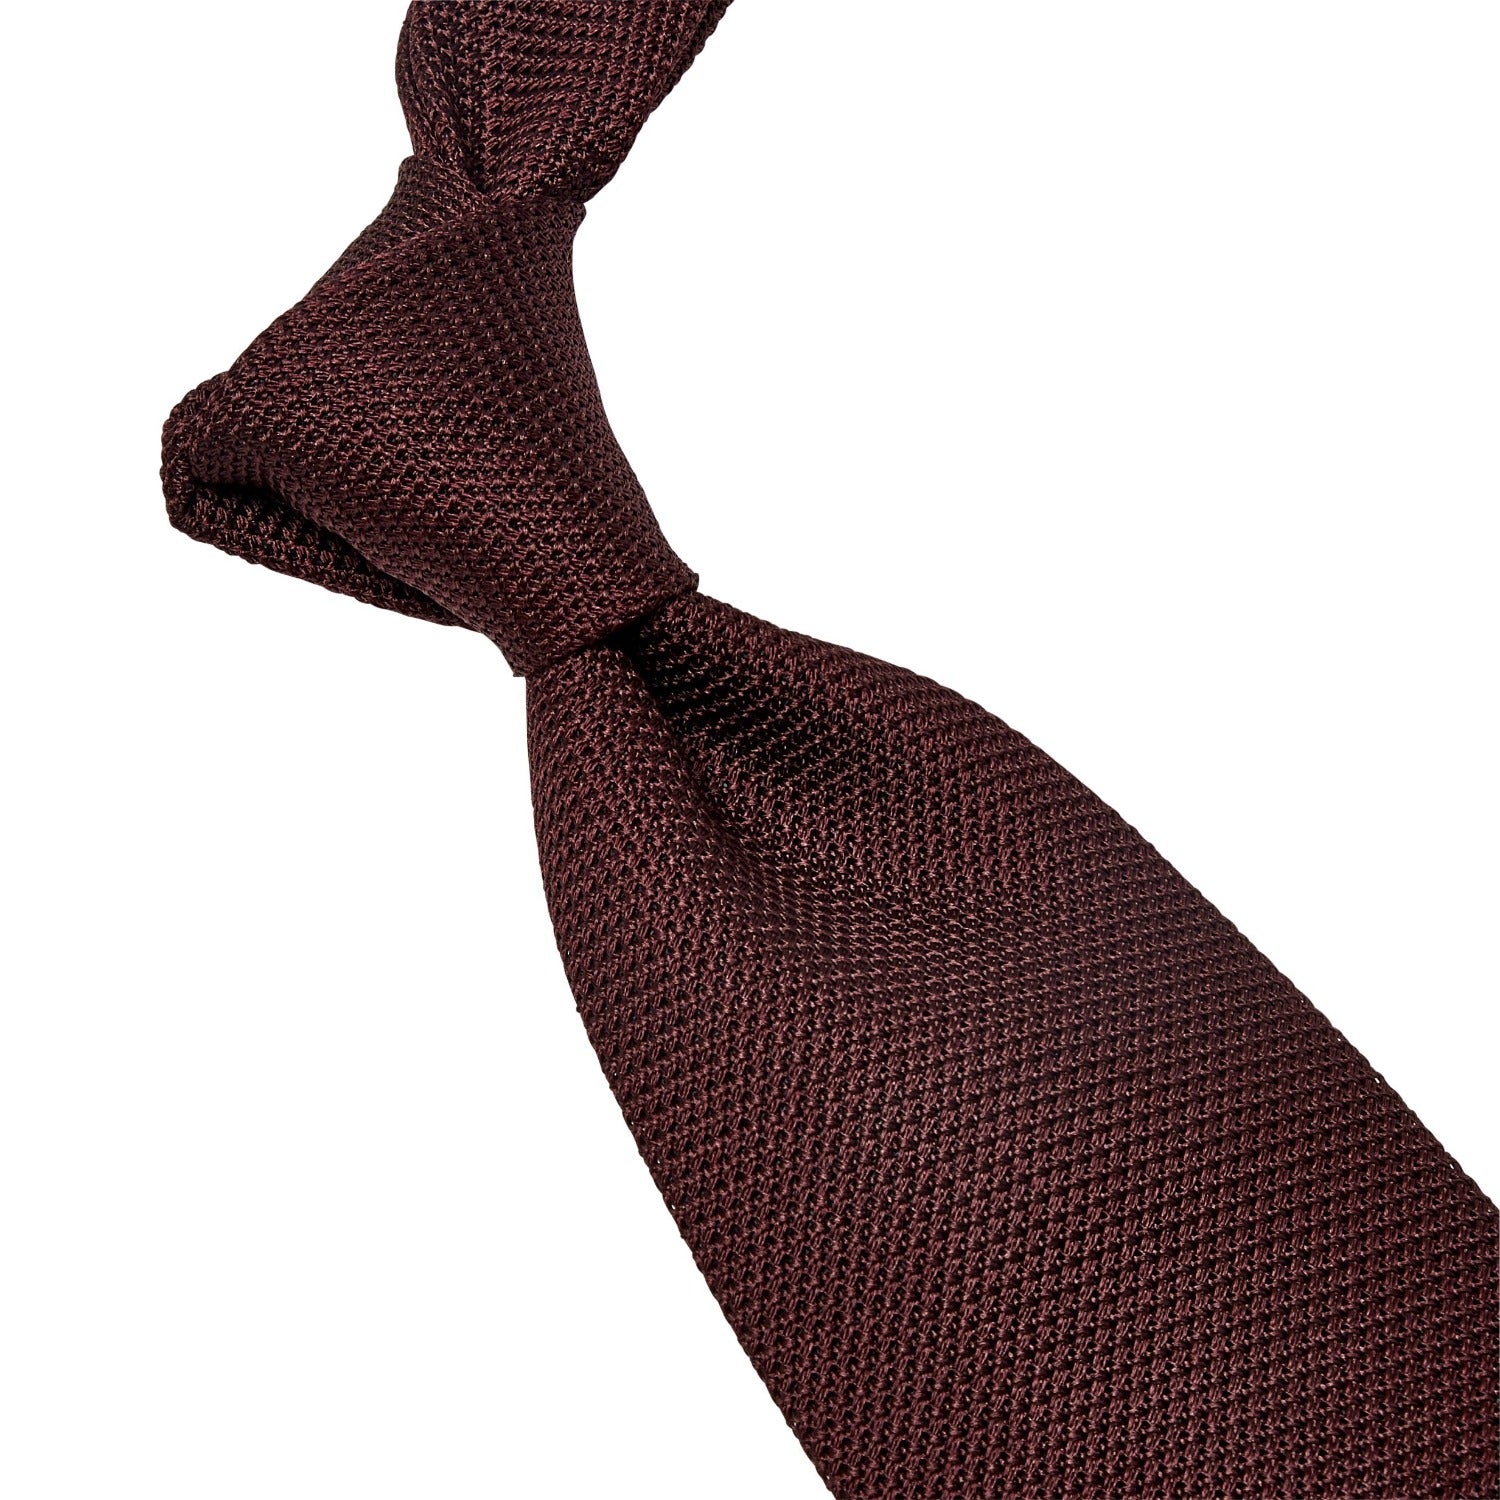 A handmade Sovereign Grade Grenadine Fina Burgundy Tie from the United Kingdom on a white background, featuring KirbyAllison.com ties.